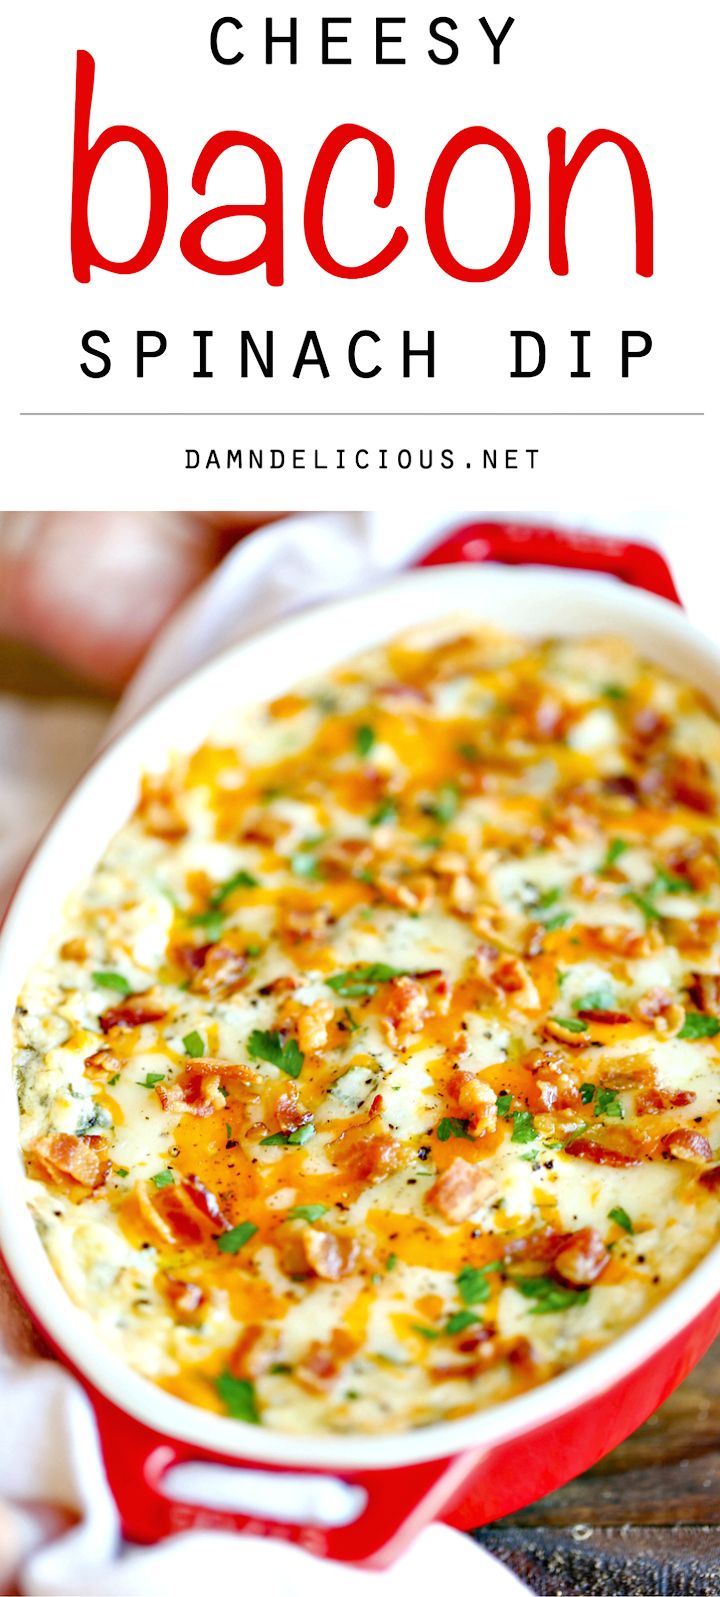 80 Flavorful & Easy Dip Recipes for Appetizers - Easy Recipes for All